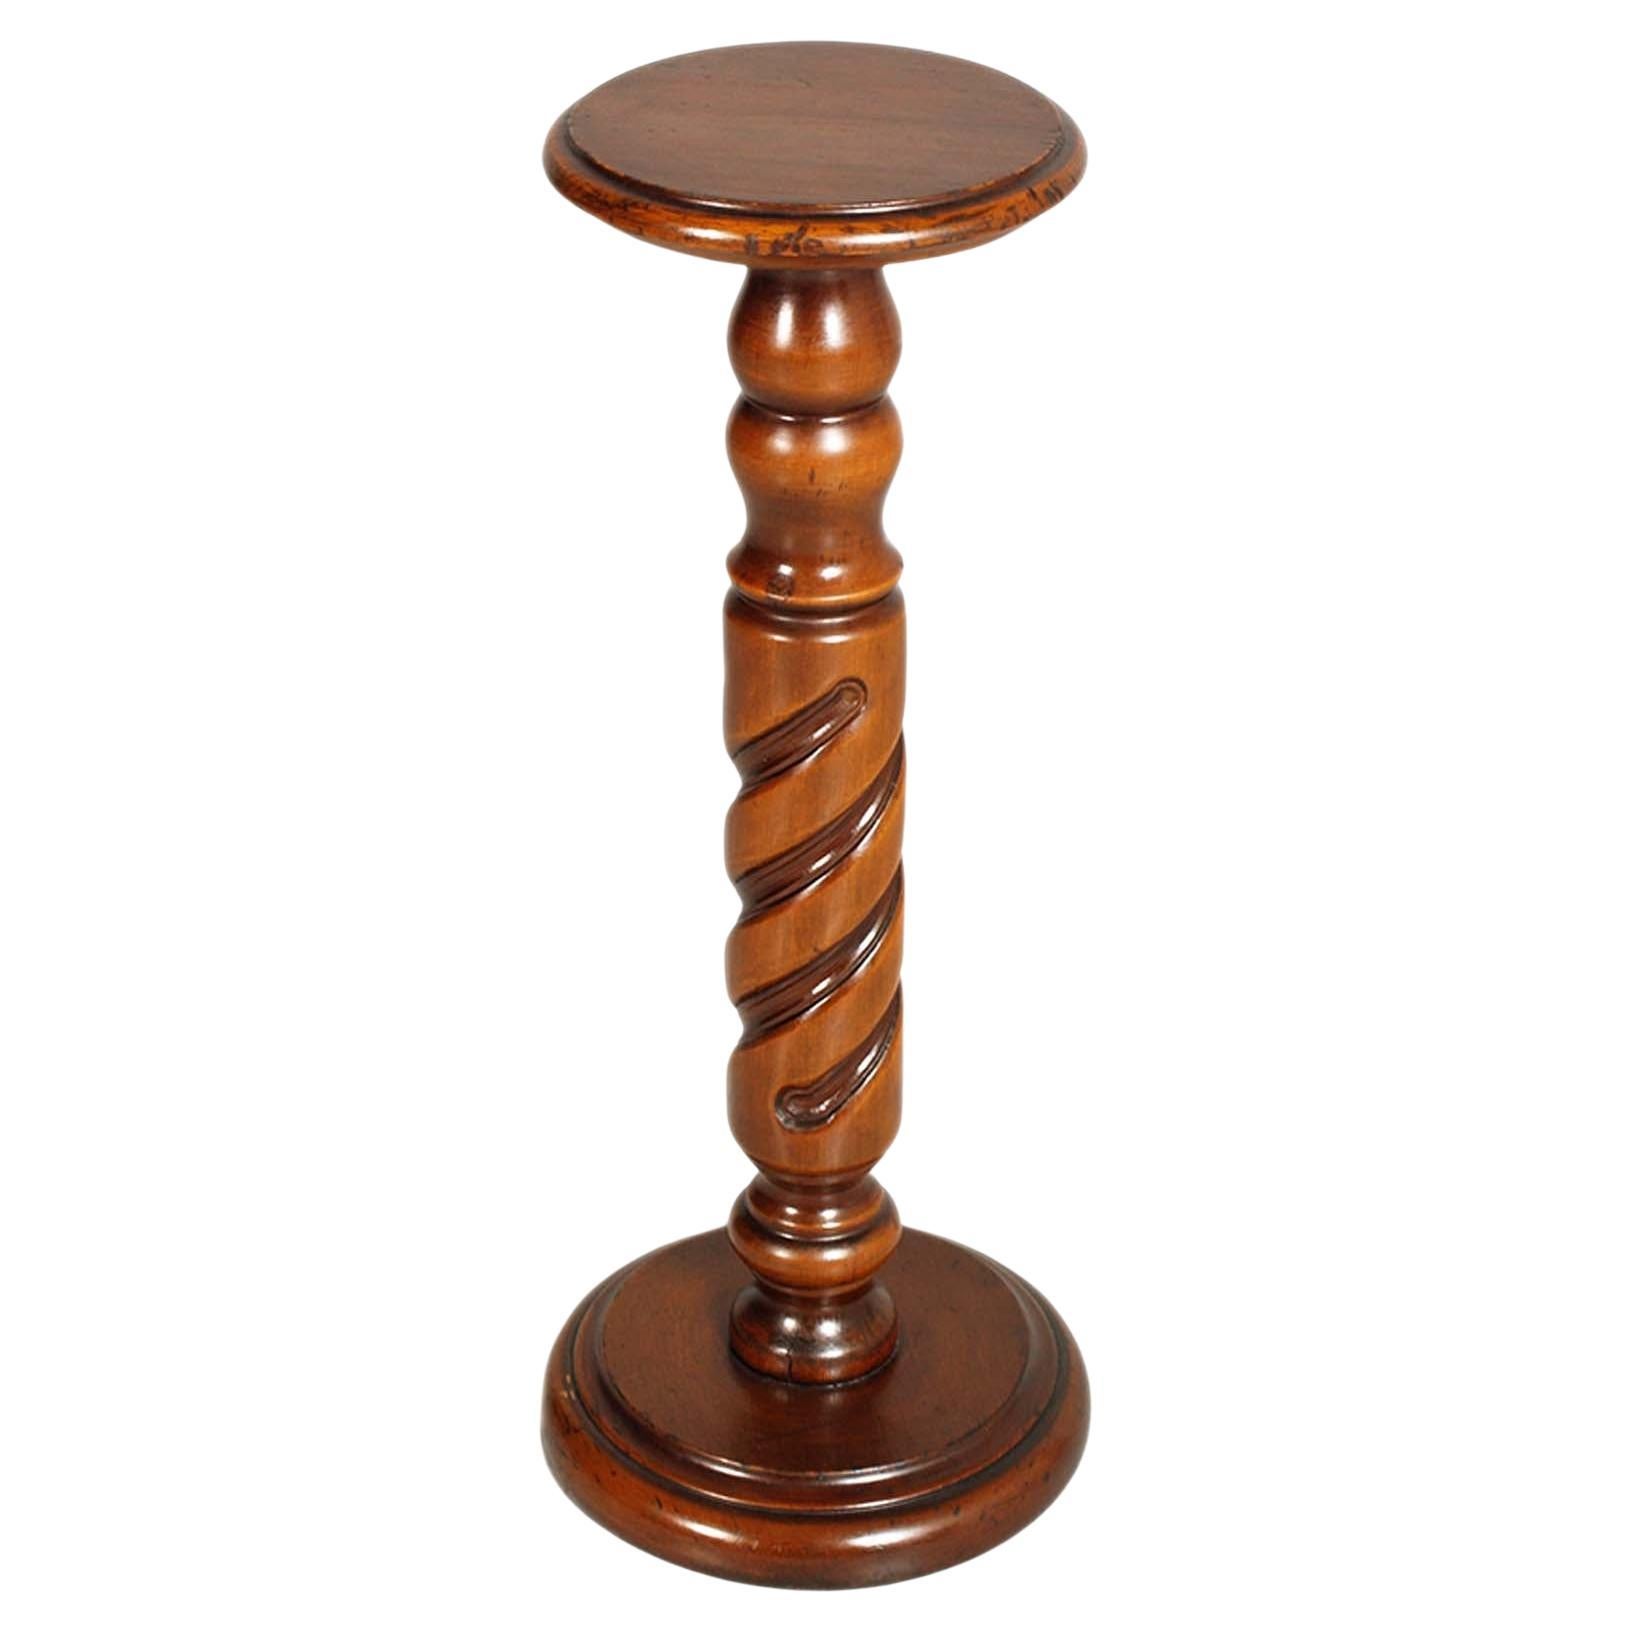 Twisted Walnut Column for Vase, Bust holder or Sculpture, 1940s, Gothic Style For Sale